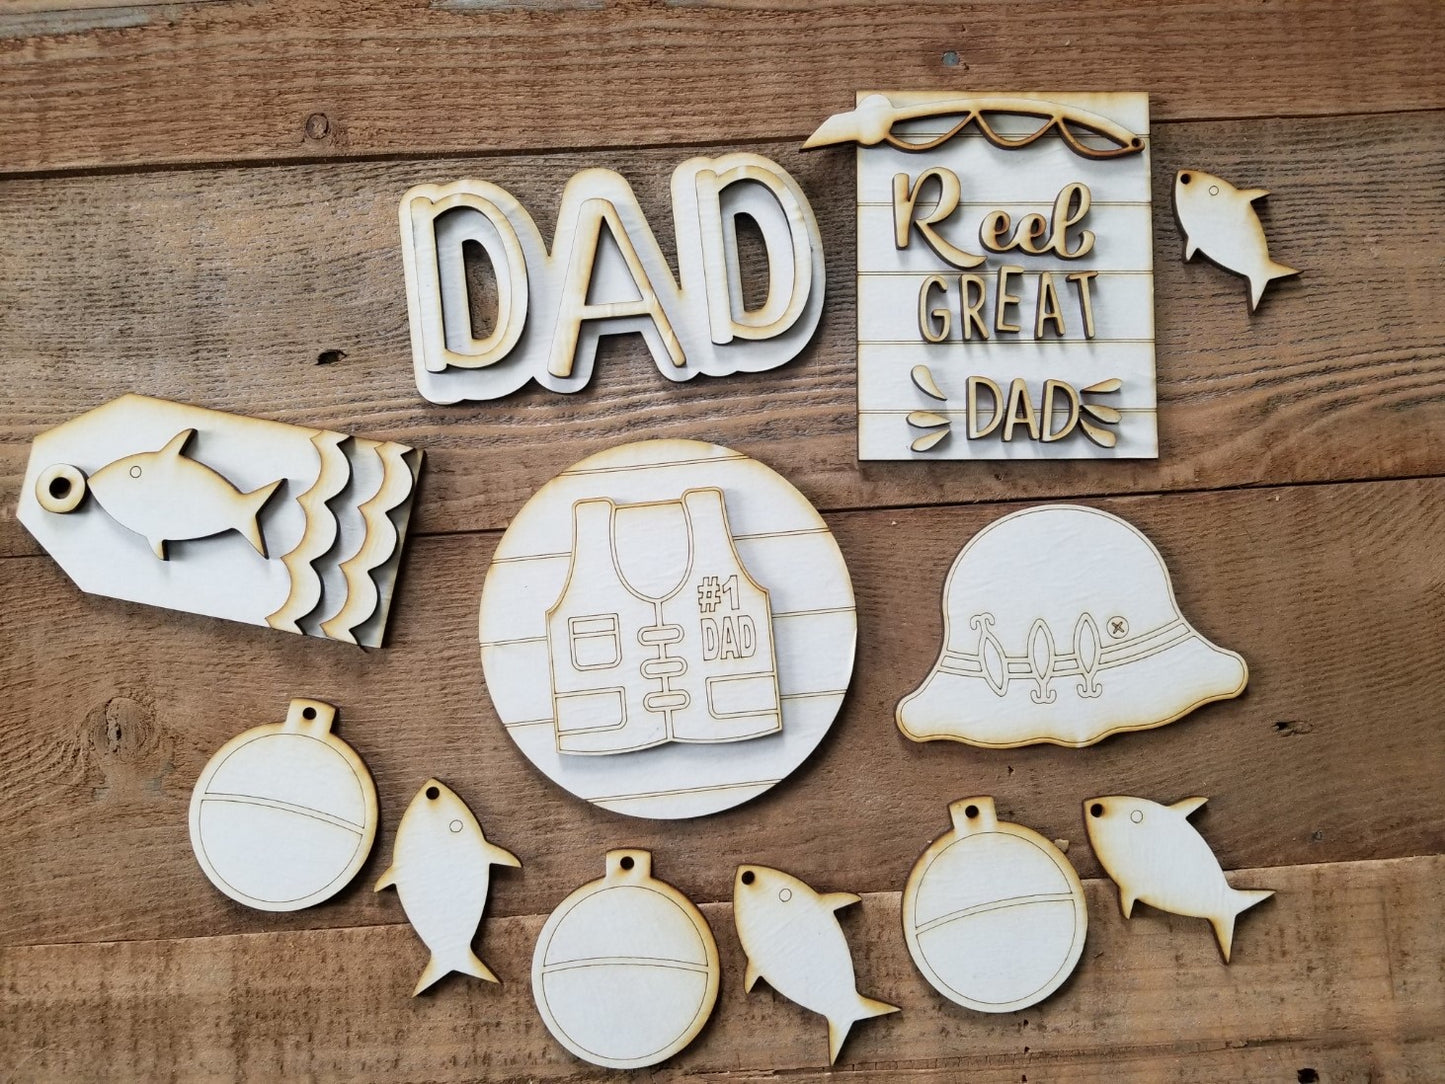 Wood Tags  Wood Tag  Wood Signs  Wood Rounds  Wood Round  Wood Blocks  Wood Blanks  Wood Blank  Summer  Spring  Shiplap  Shape Blanks  Rounds  Round Wood  Reel  LOVE  Laser DIY  Kitchen  kit  Great Dad  Gift  Fun  Fishing Pole  Fishing  Fish  Door Tags  Door Tag  diy  Dad  Cutting  Crafty Gifts  Celebrate  Blank Shapes  Banner